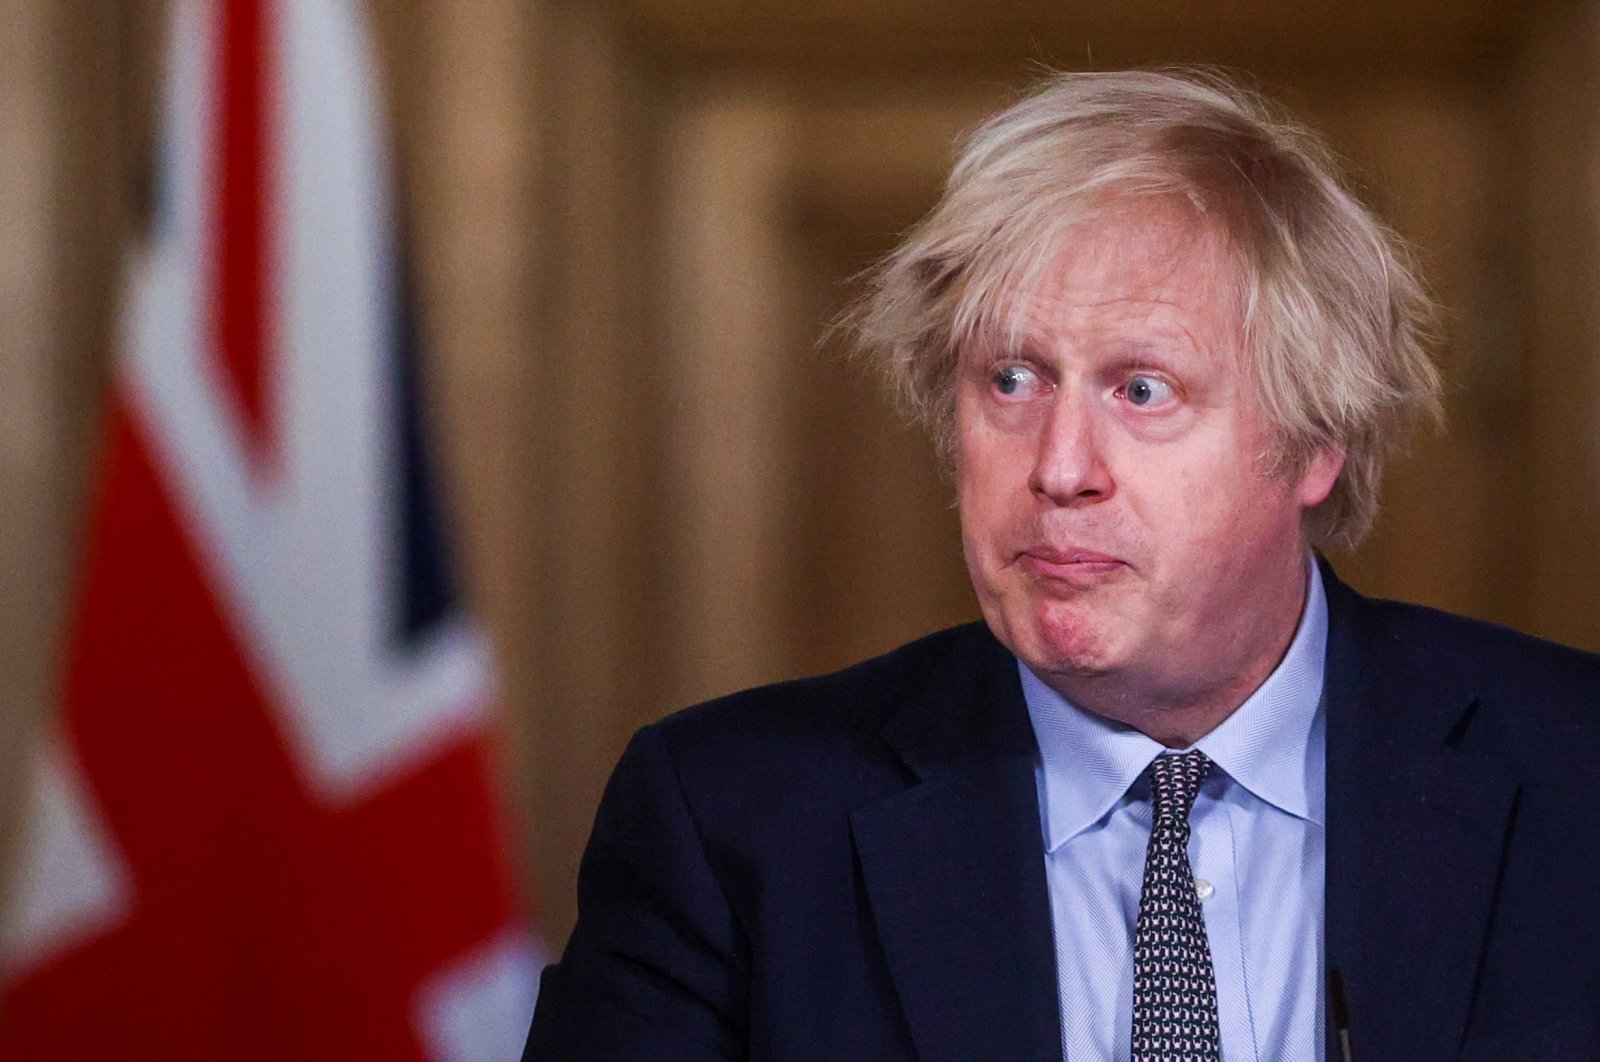 Britain's Prime Minister Boris Johnson holds a news conference at 10 Downing Street, on the day of reflection to mark the anniversary of Britain's first coronavirus lockdown, in London, United Kingdom, March 23, 2021. (Reuters Photo)